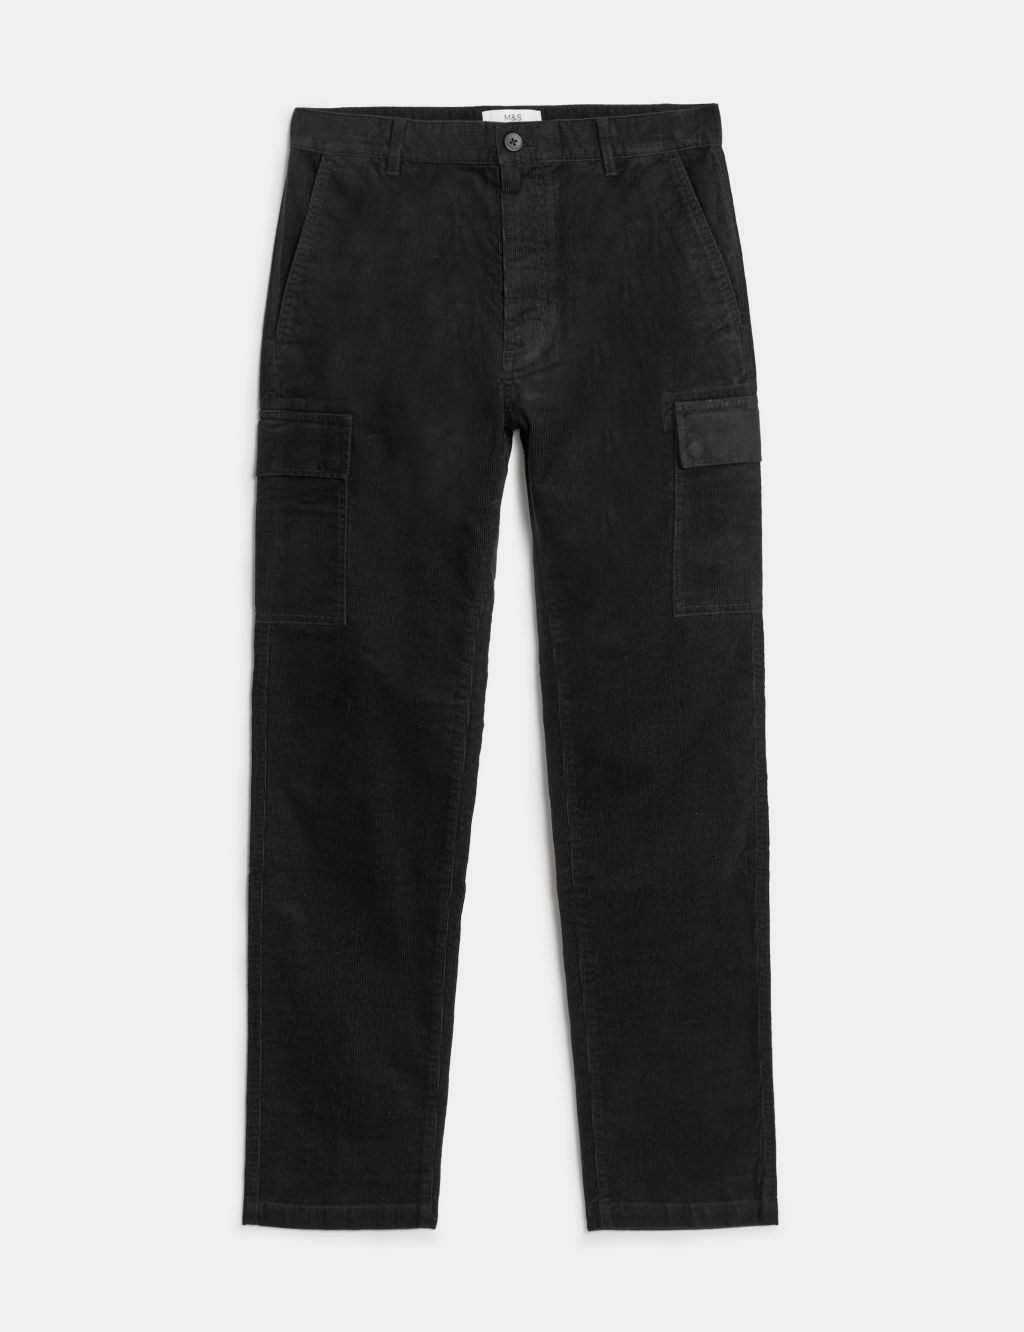 Straight Fit Corduroy Stretch Cargo Trousers image 2